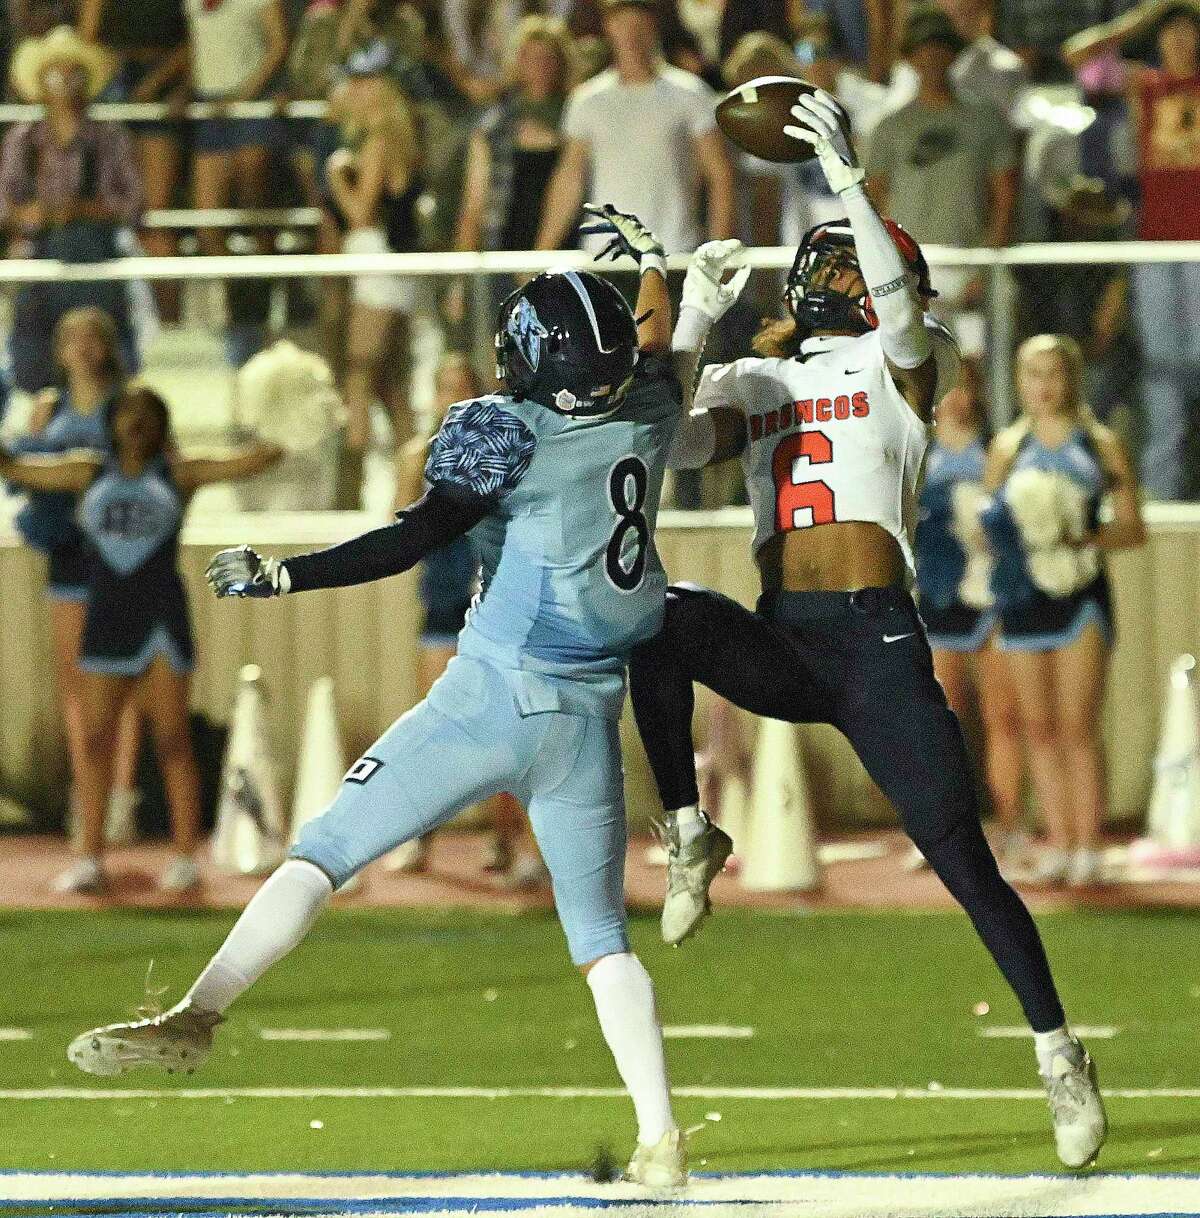 Johnson defender Shawn O’Gorman (8) breaks up an attempted touchdown pass to Brandeis receiver Jaden Perez (6) during high school football action at Comalander Stadium on Friday, Sept. 30, 2022.